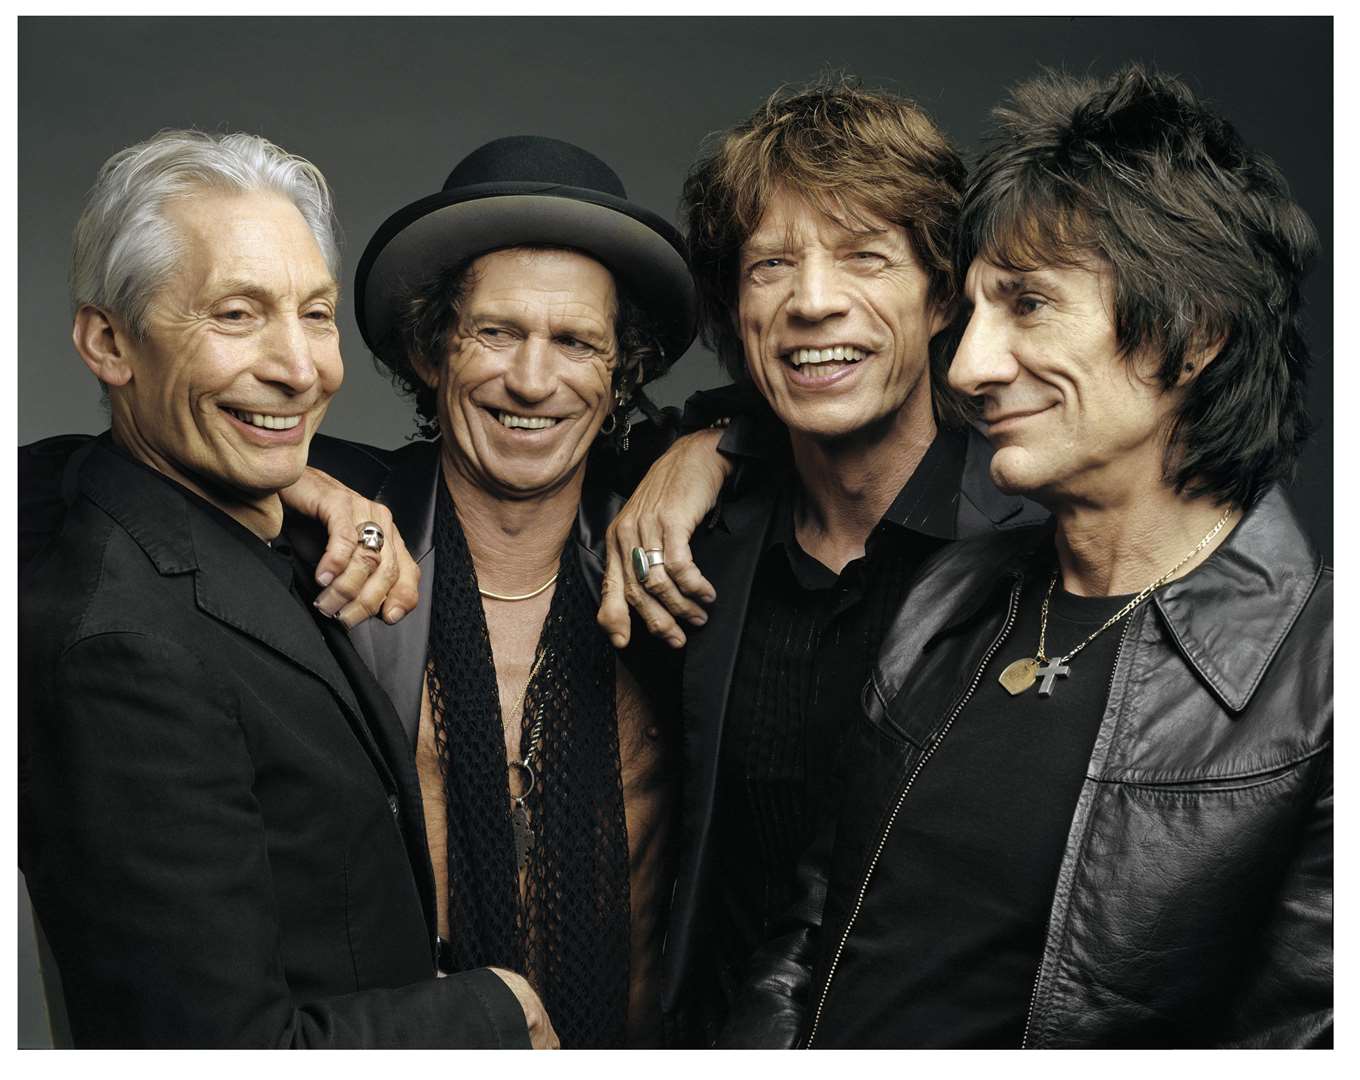 The Rolling Stones. Left-right: Charlie Watts, Keith Richards, Mick Jagger and Ronnie Wood